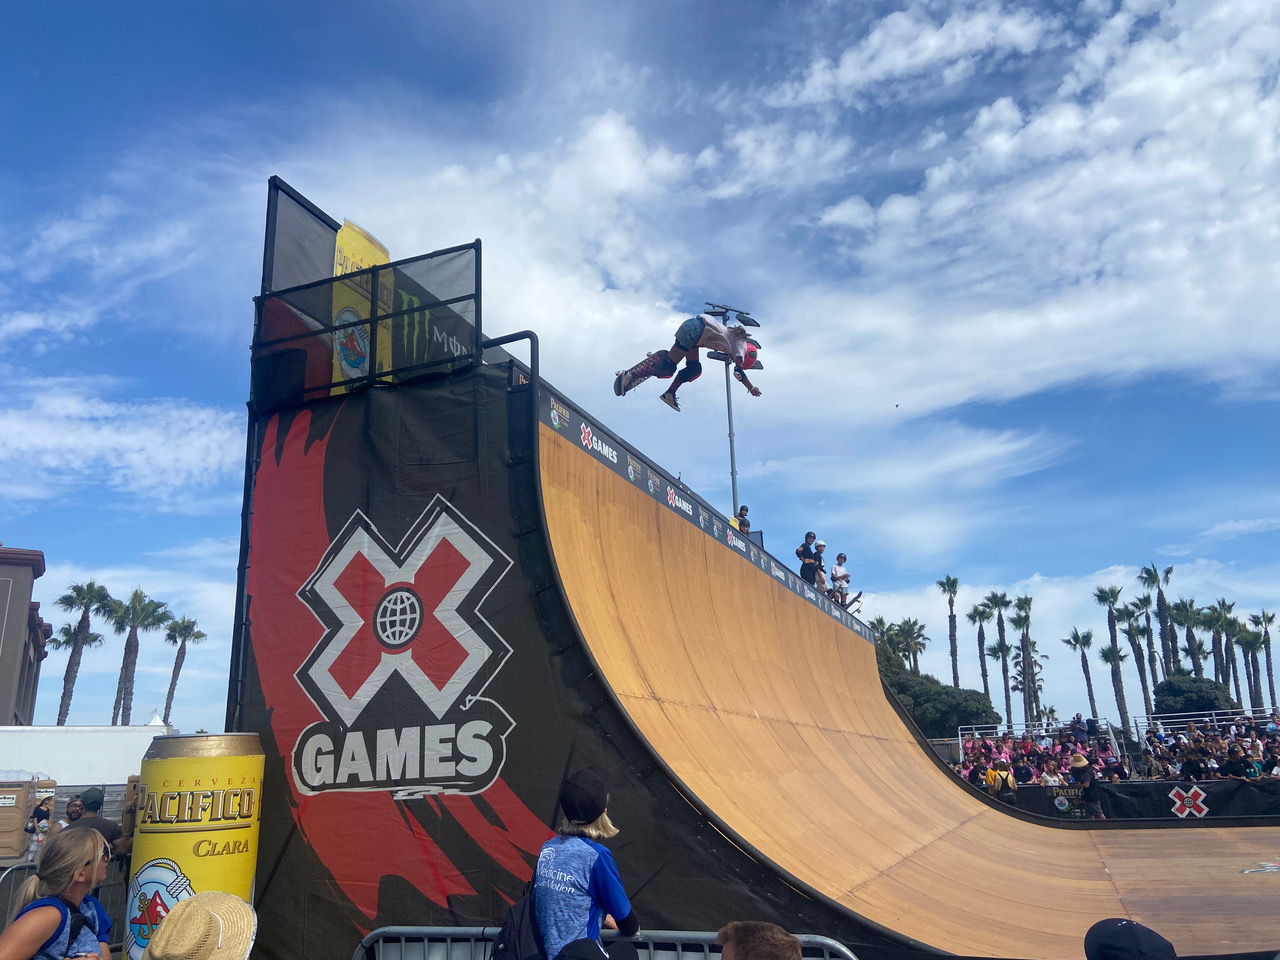 X Games: Reese Nelson, 10, becomes youngest to win medal